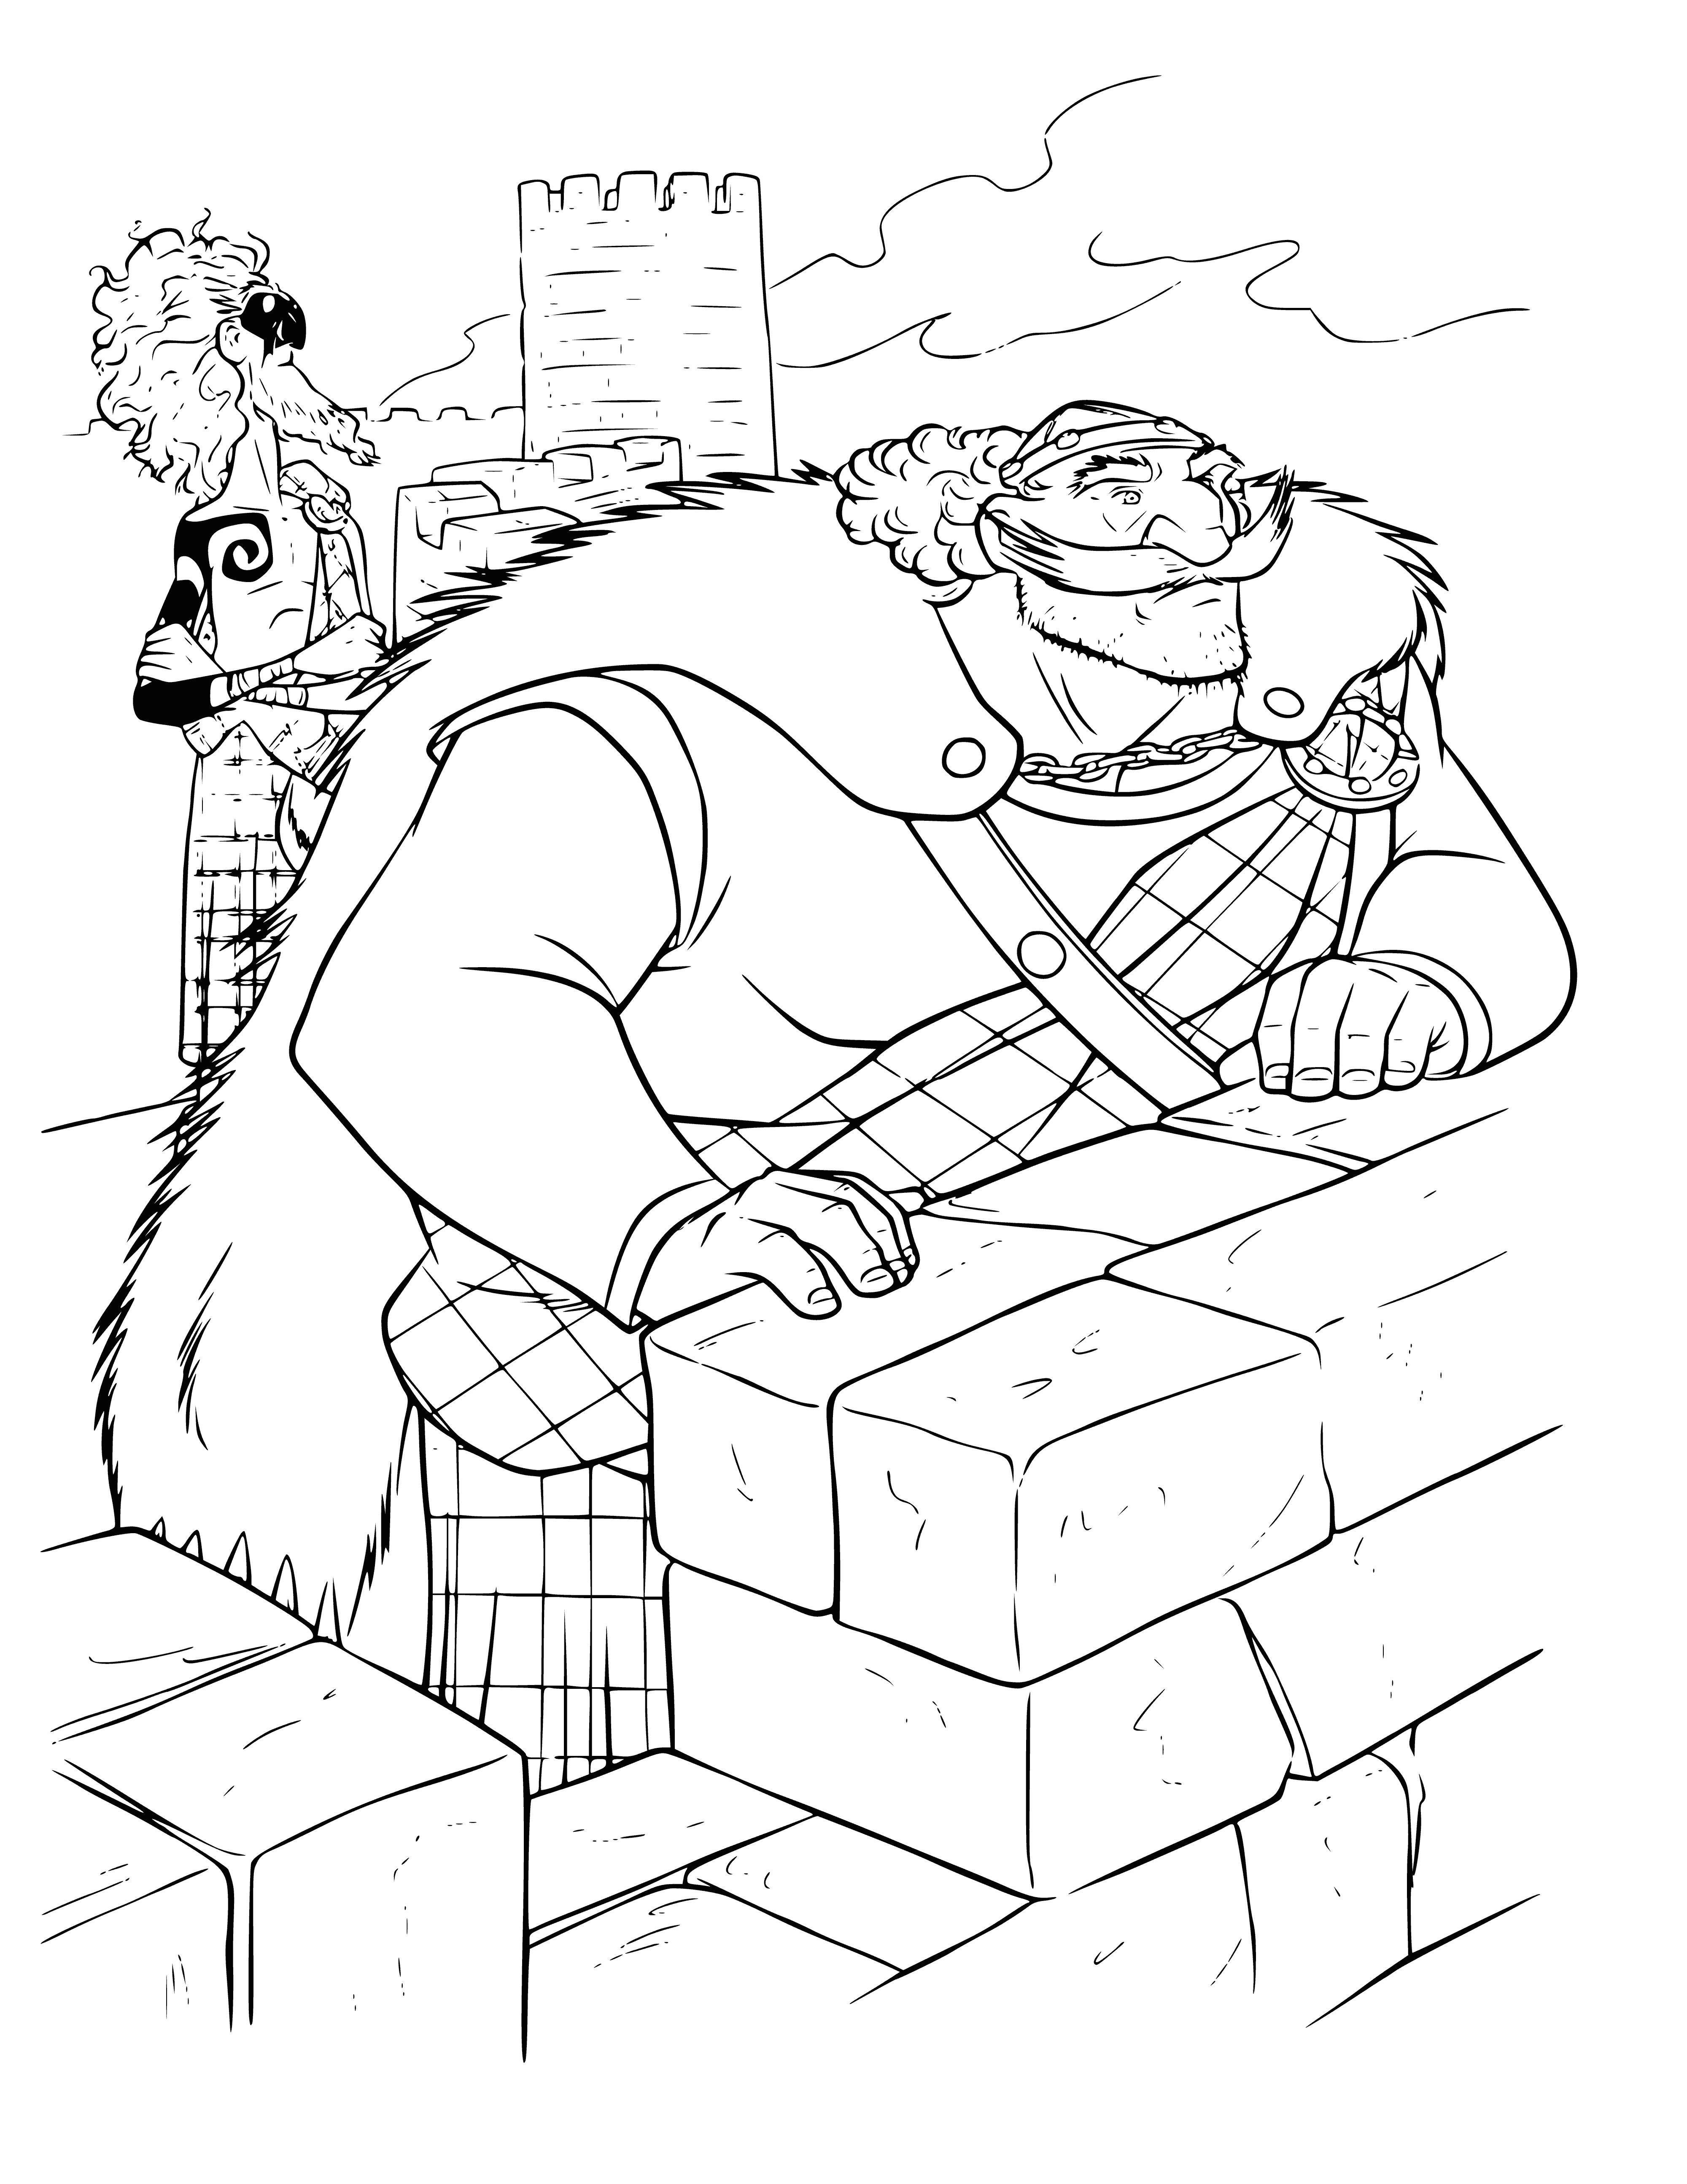 coloring page: King stands atop castle wall, bravely surveying his land. #BraveKing #outlook